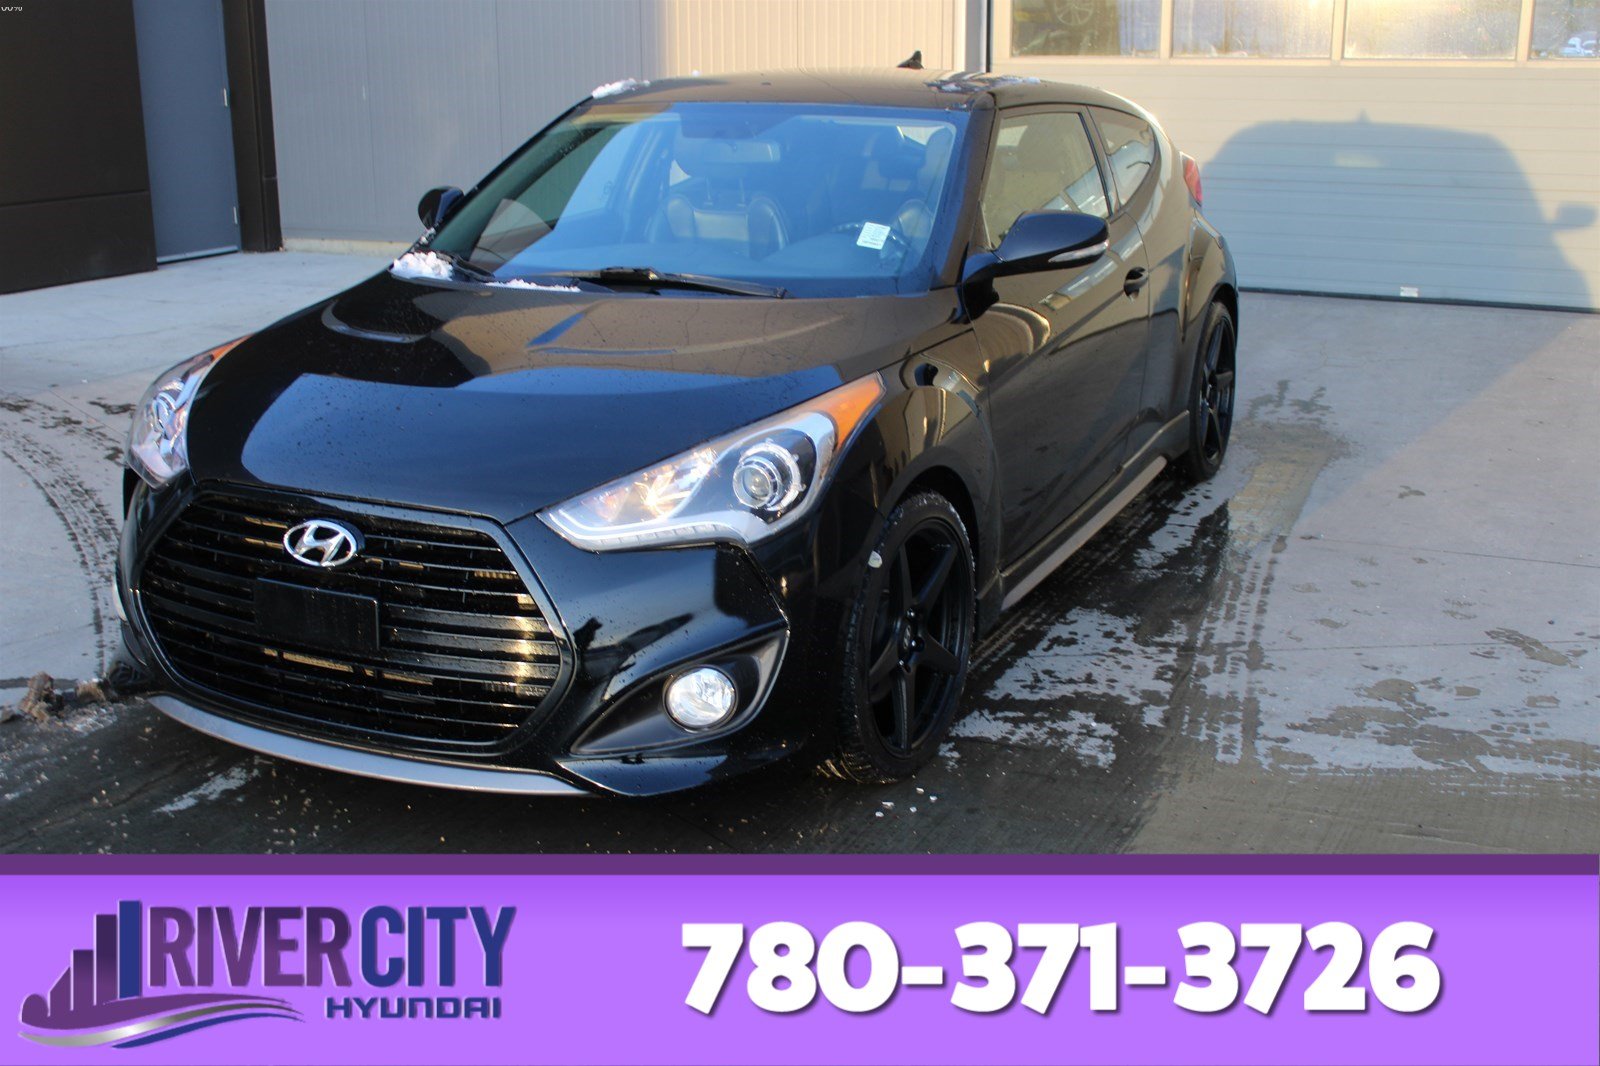 Certified Pre Owned 2014 Hyundai Veloster Turbo Tech Leather Heated Seats Back Up Cam Bluetooth A C With Navigation